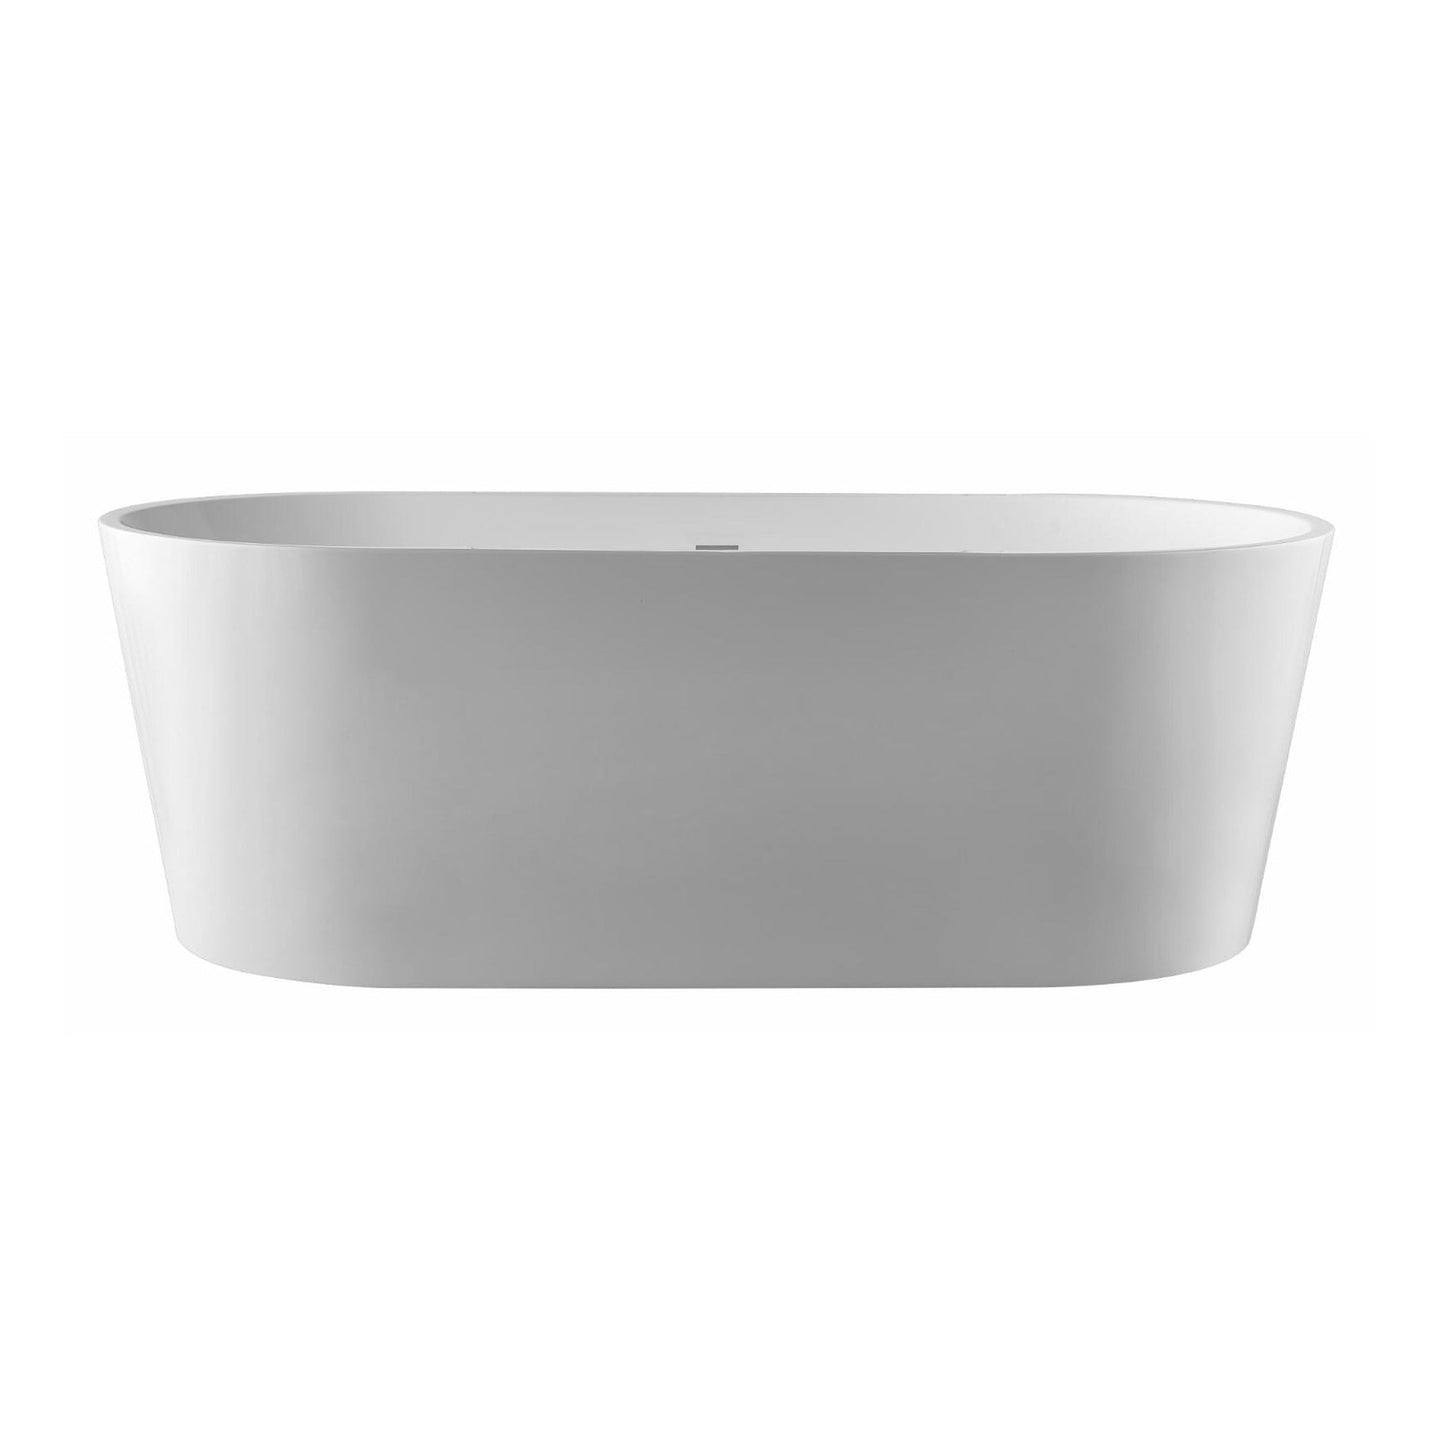 PULSE ShowerSpas 59" W x 30" D Polished White Acrylic Oval Freestanding Tub With Overflow and Stainless Steel Brackets